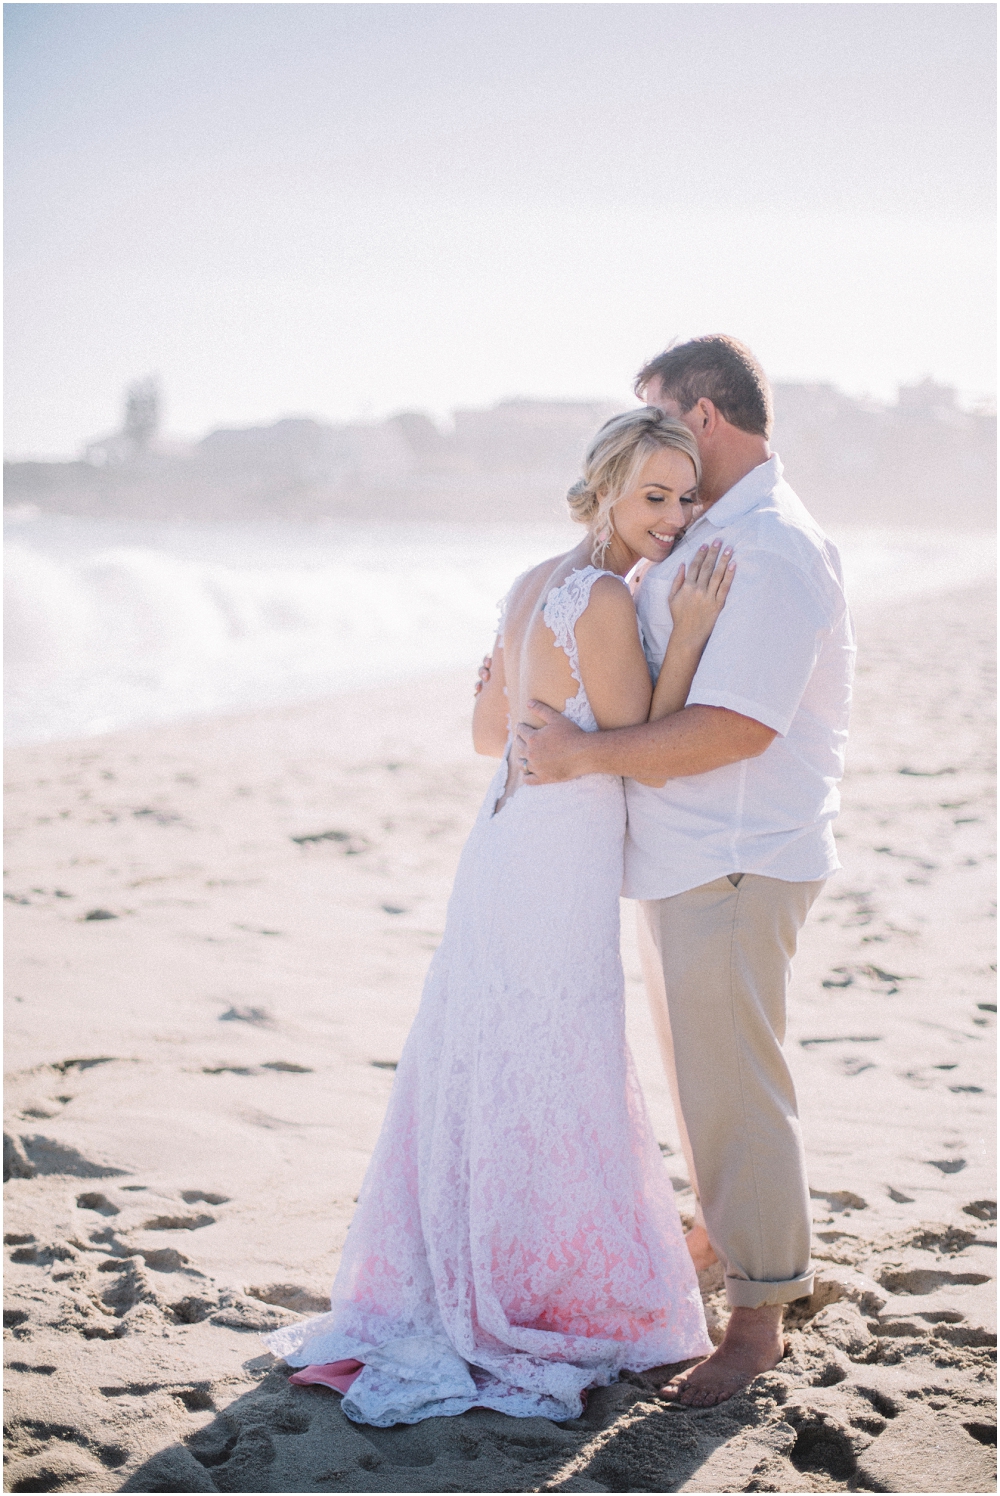 Western Cape Wedding Photographer Ronel Kruger Photography Cape Town_4054.jpg